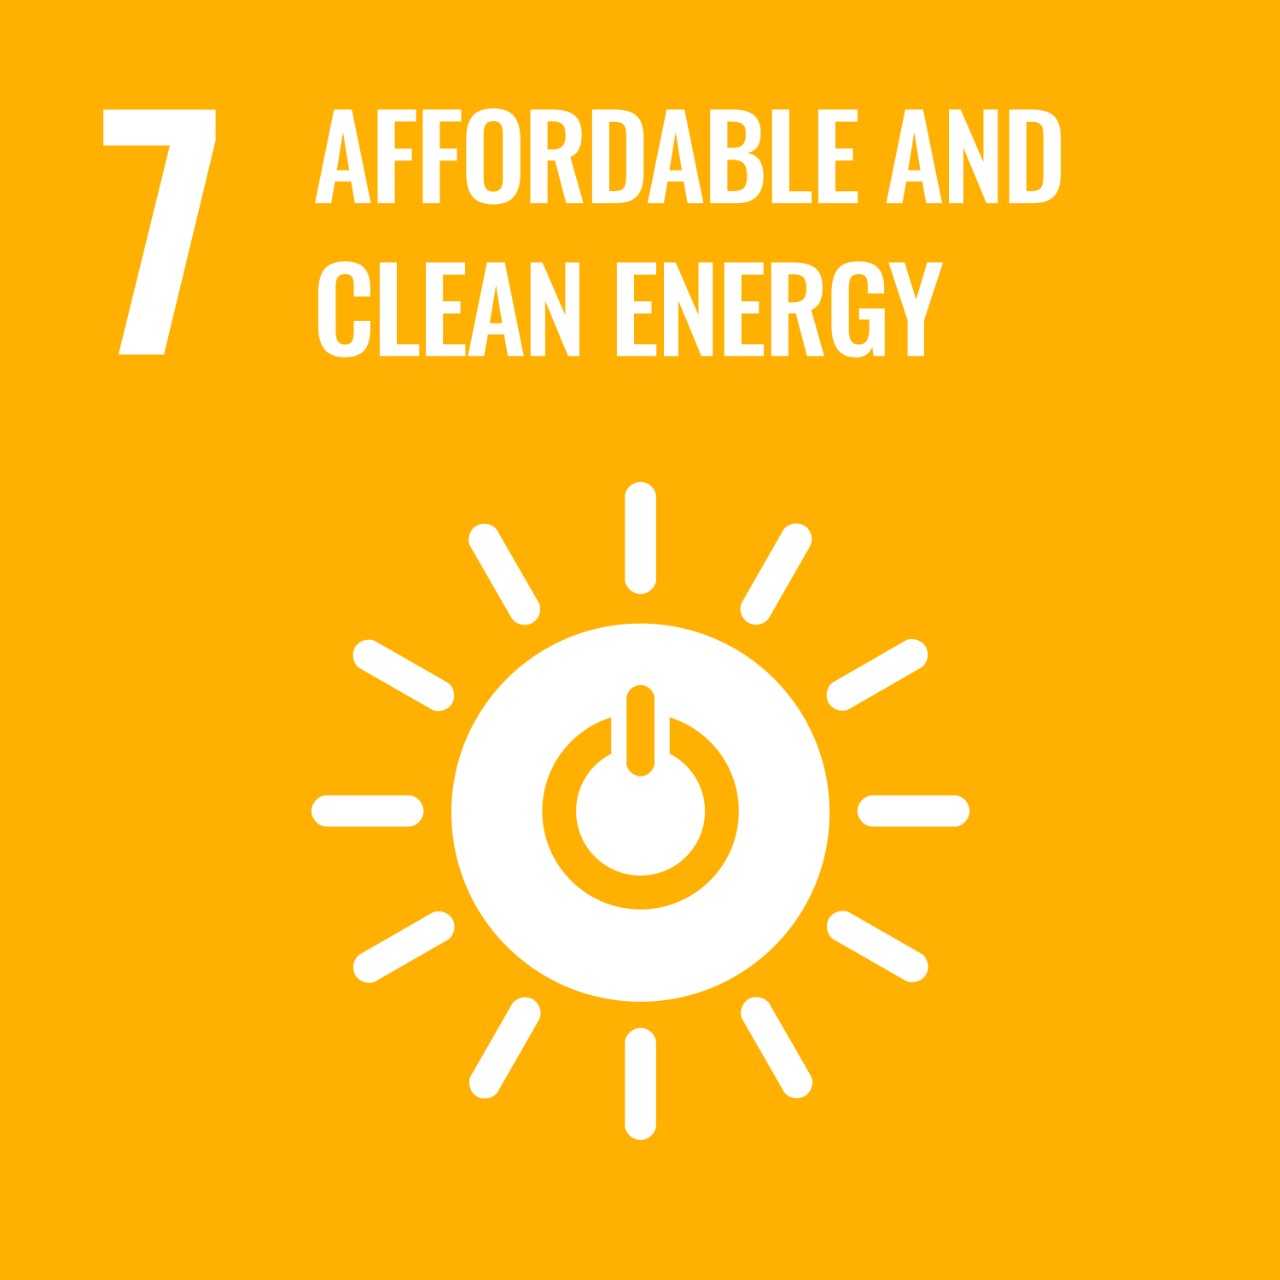 SDG 7 – Affordable and clean energy